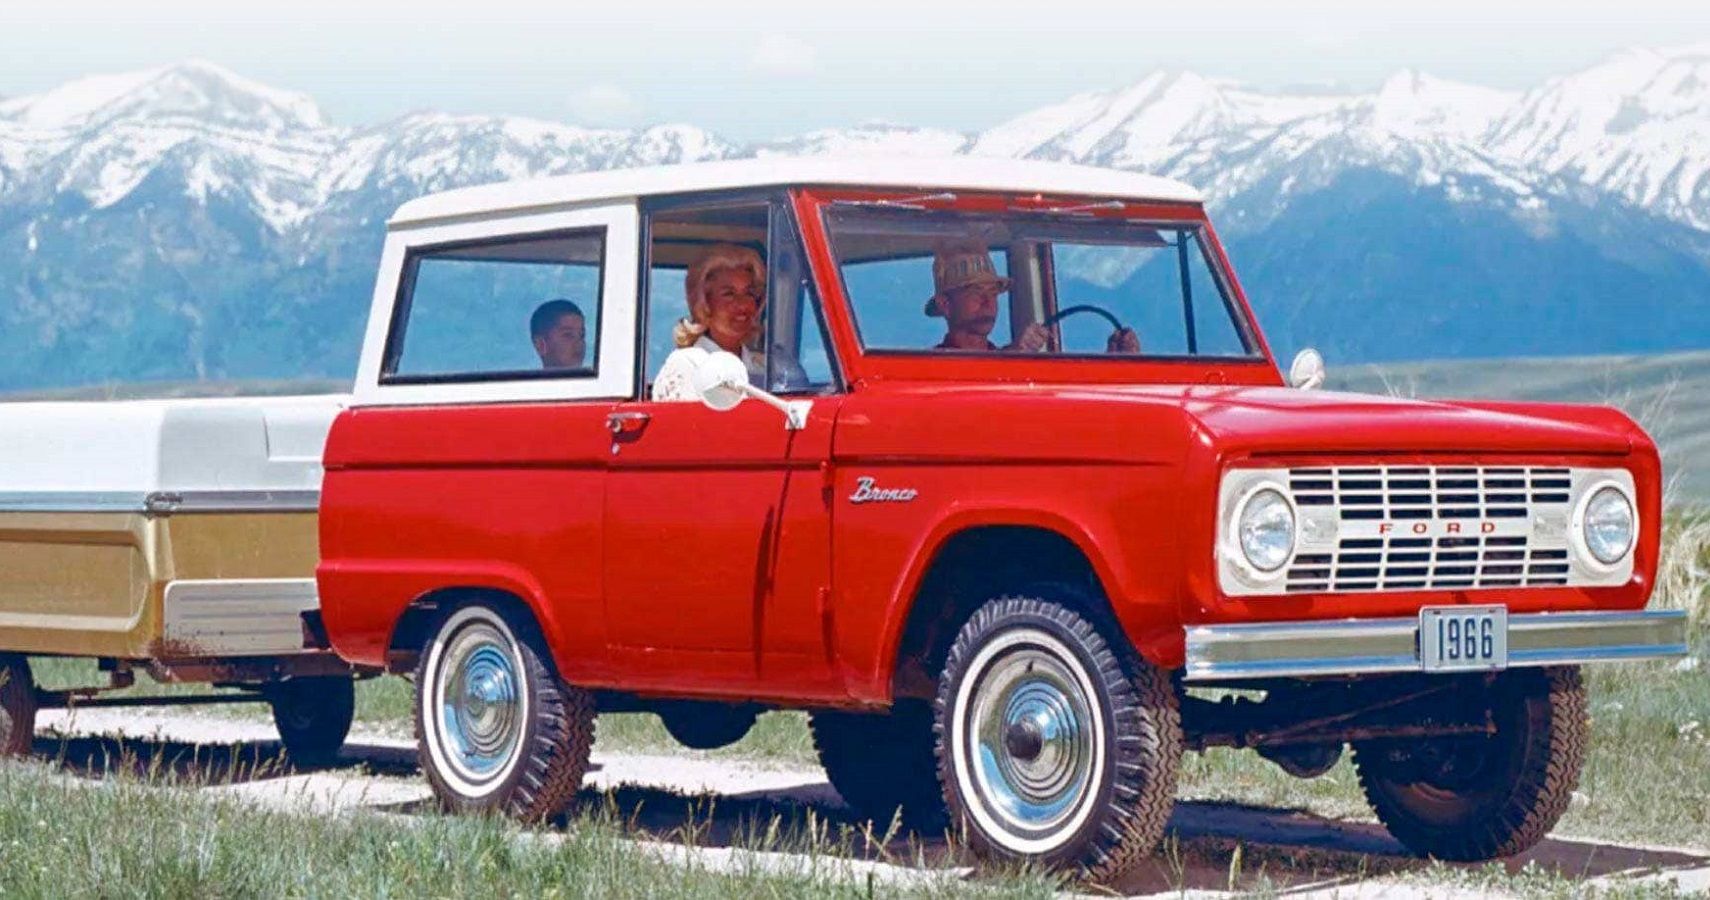 Classic red Ford Bronco